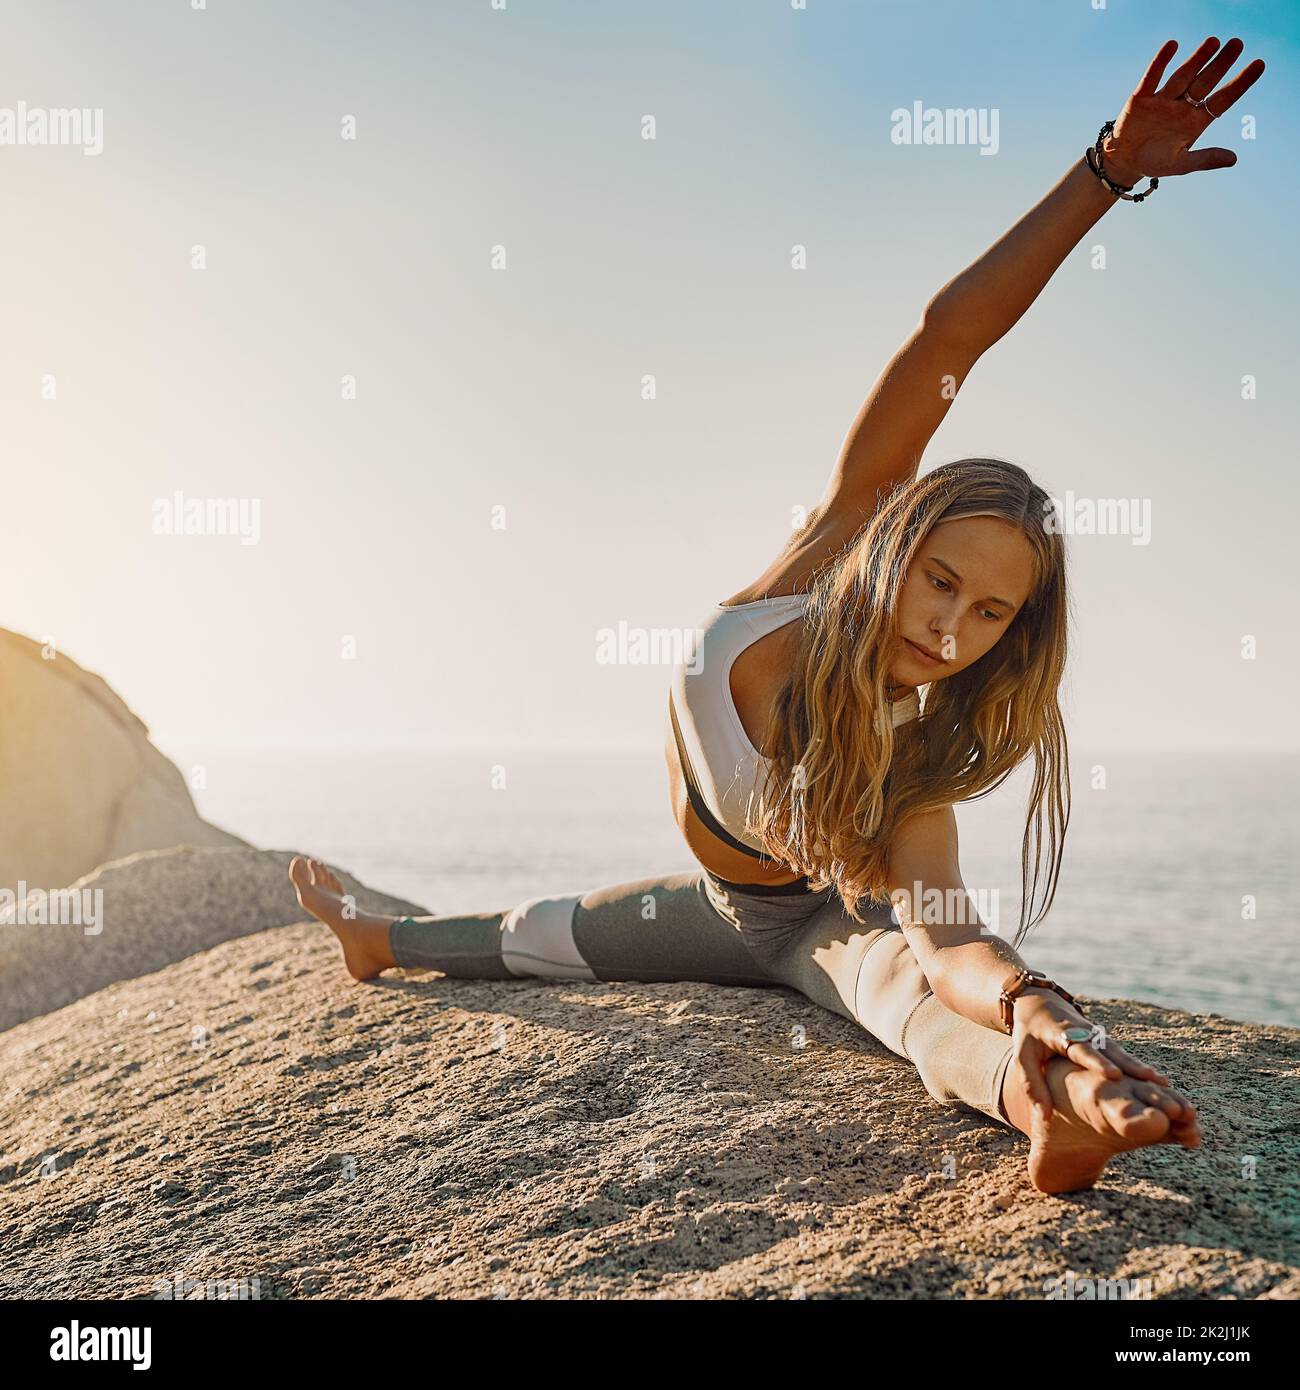 Stay patient and trust your journey. Shot of an athletic young woman practicing yoga on the beach. Stock Photo